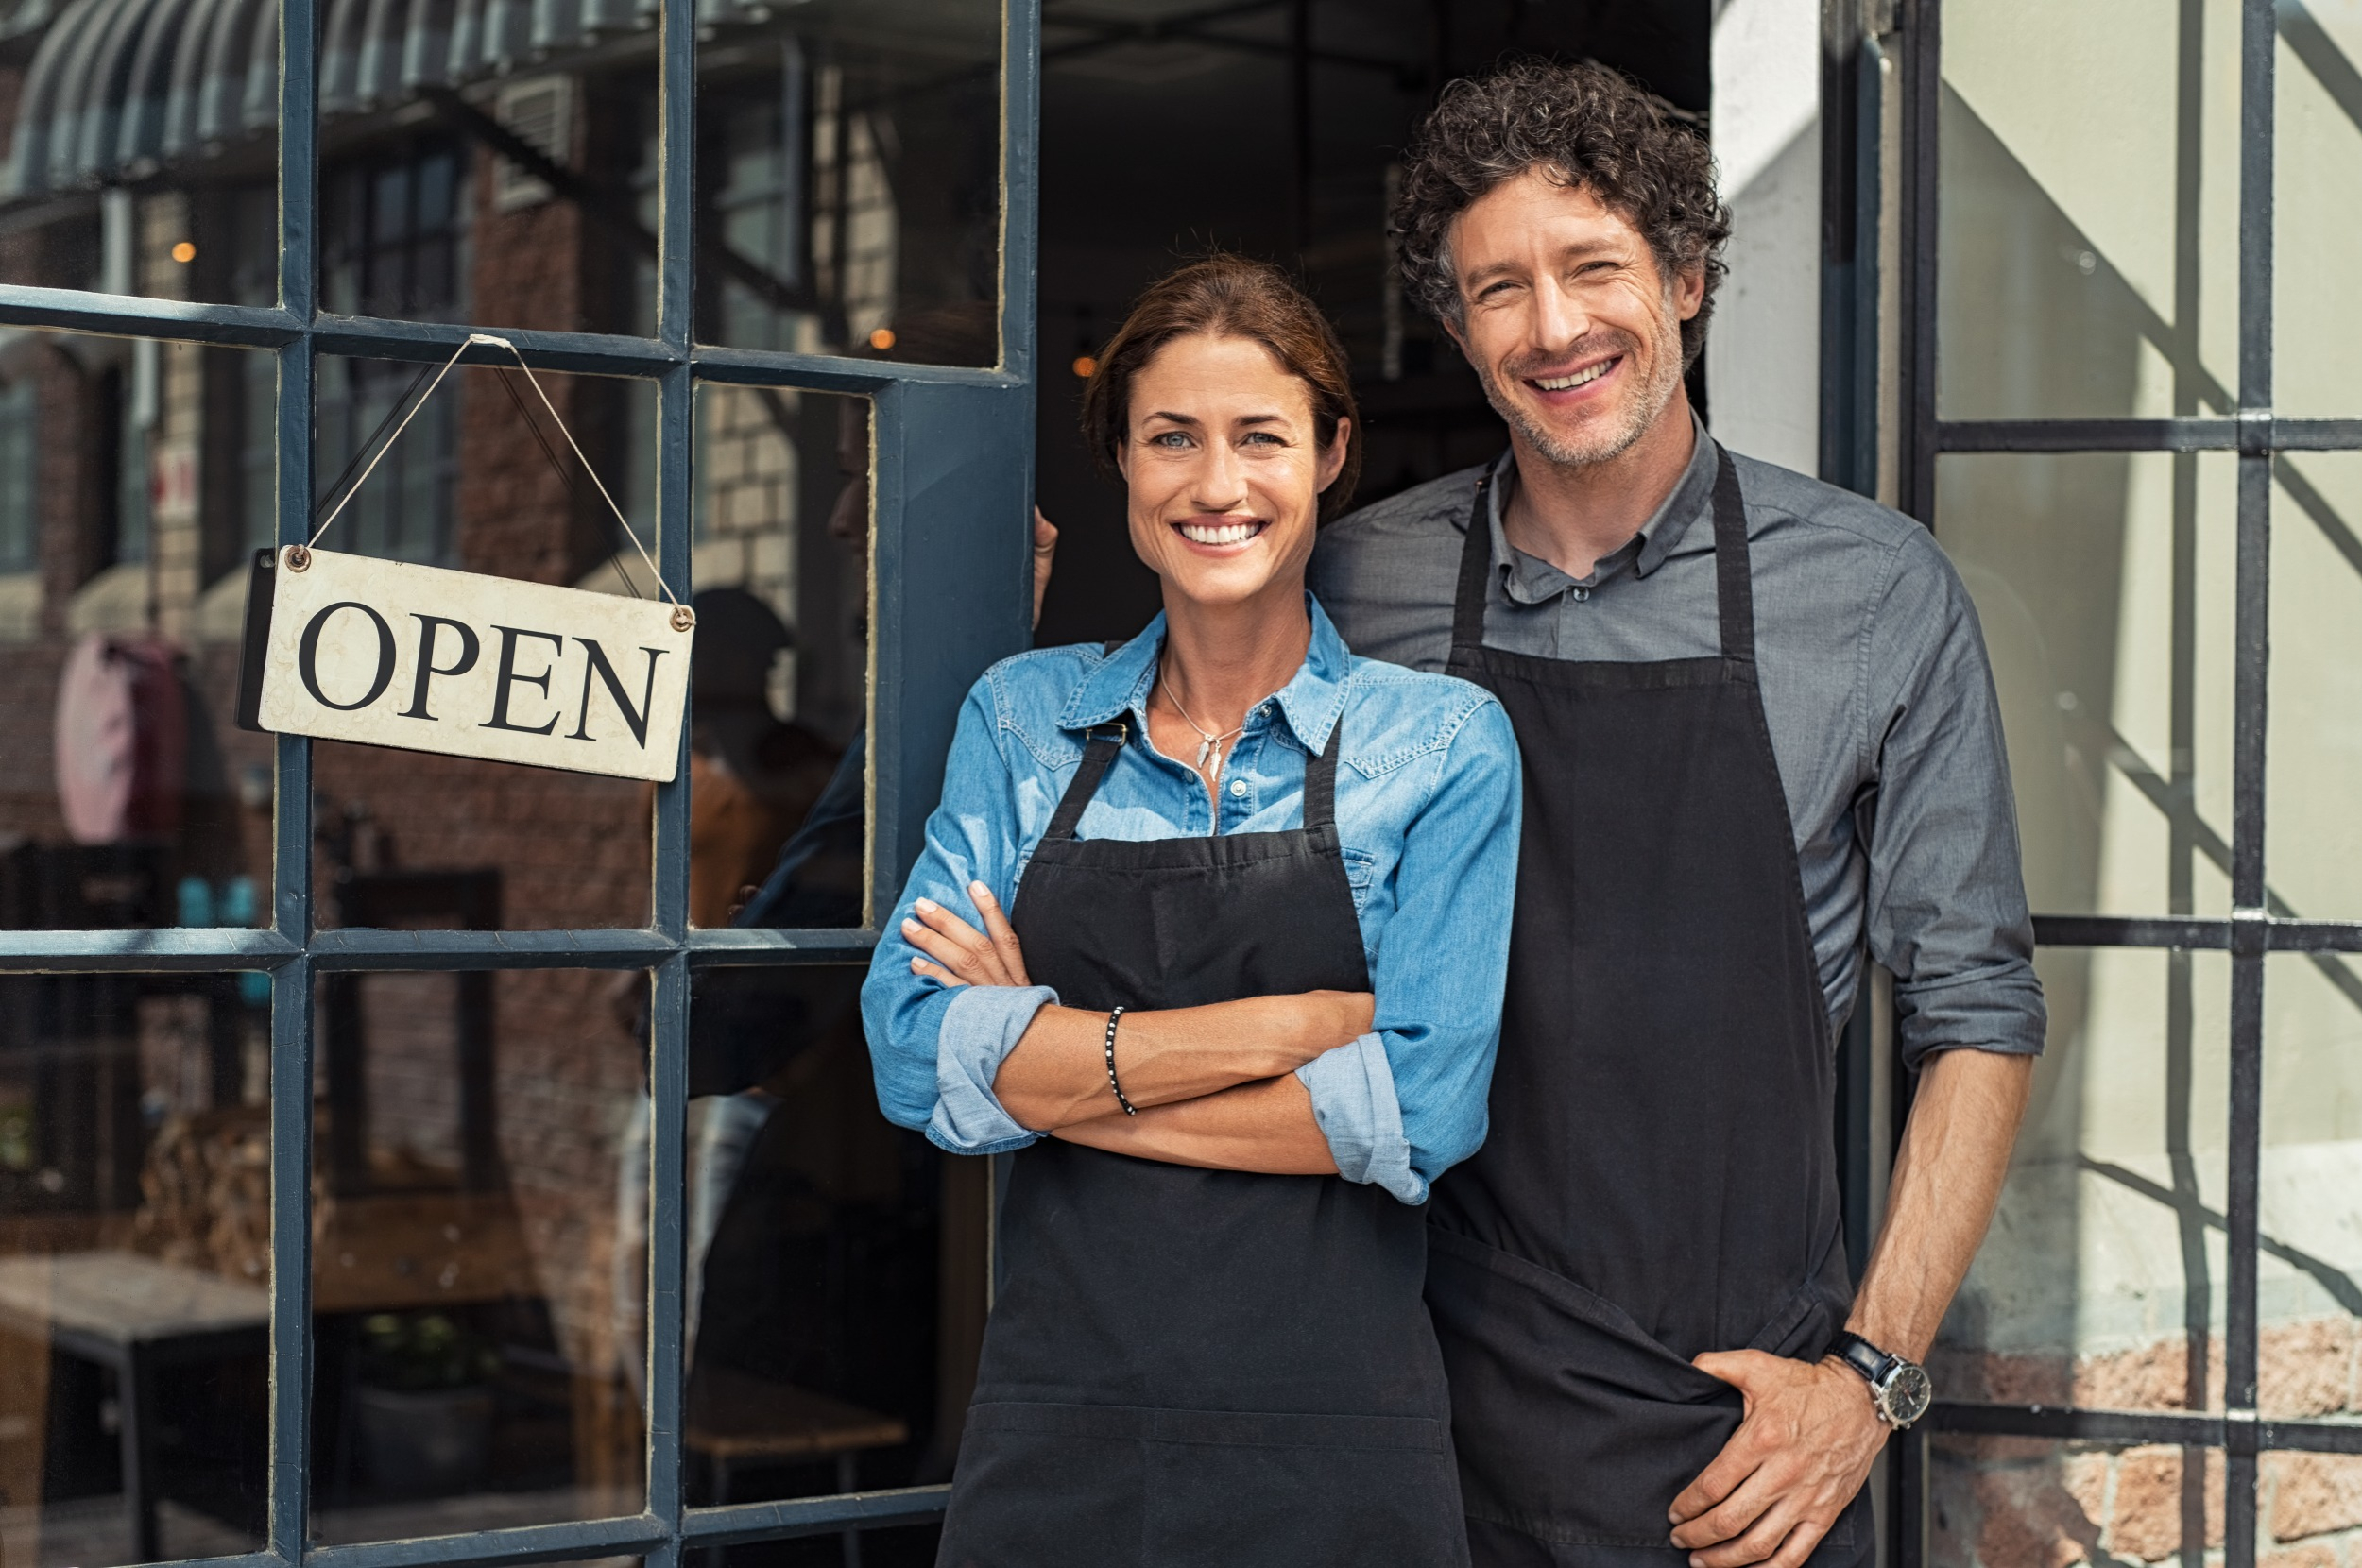 Owners of Multiple Small Businesses May Need to Comply with the ACA